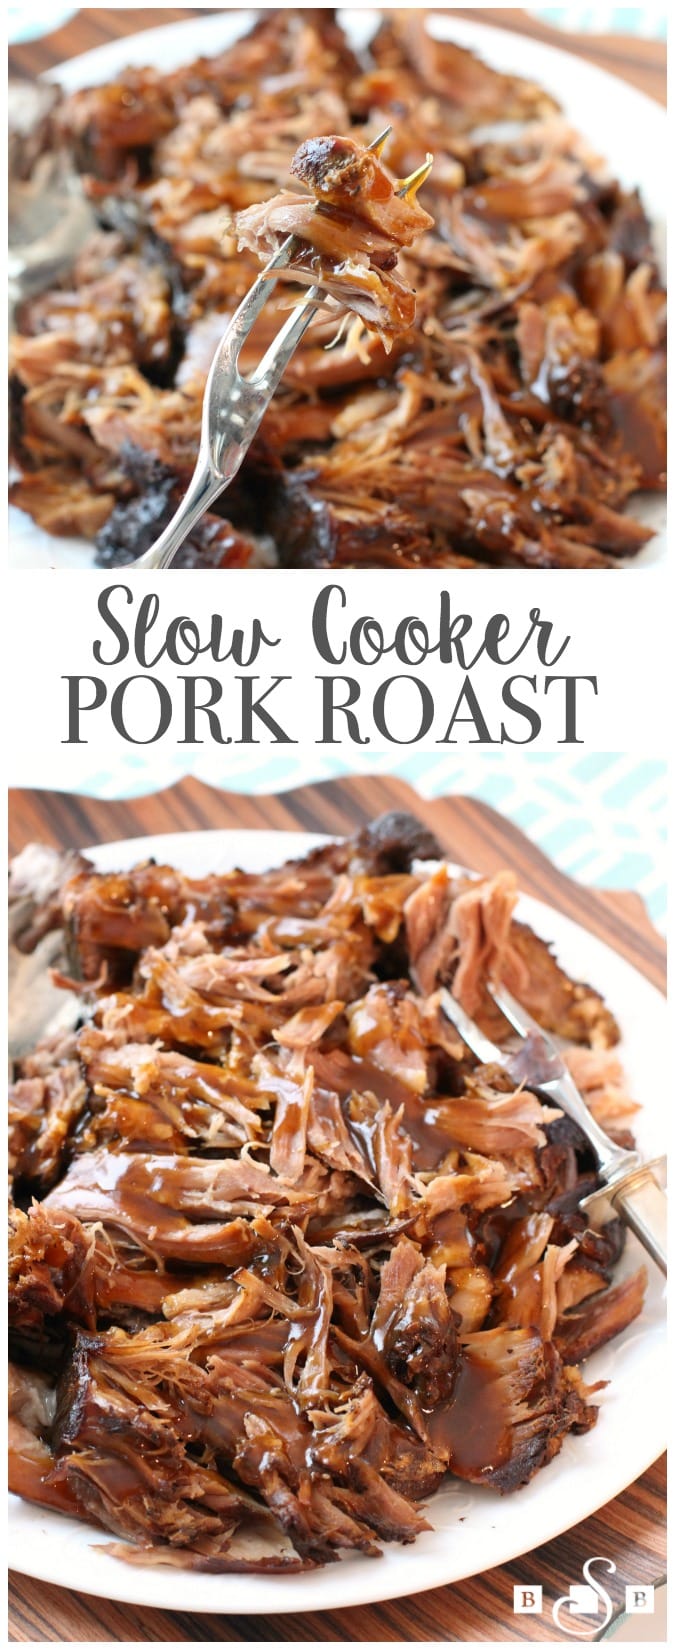 Slow Cooker Pork Roast made with simple ingredients, ready to cook in minutes! Fall-apart tender pork with a flavorful gravy on top make this crock pot pork recipe amazing.